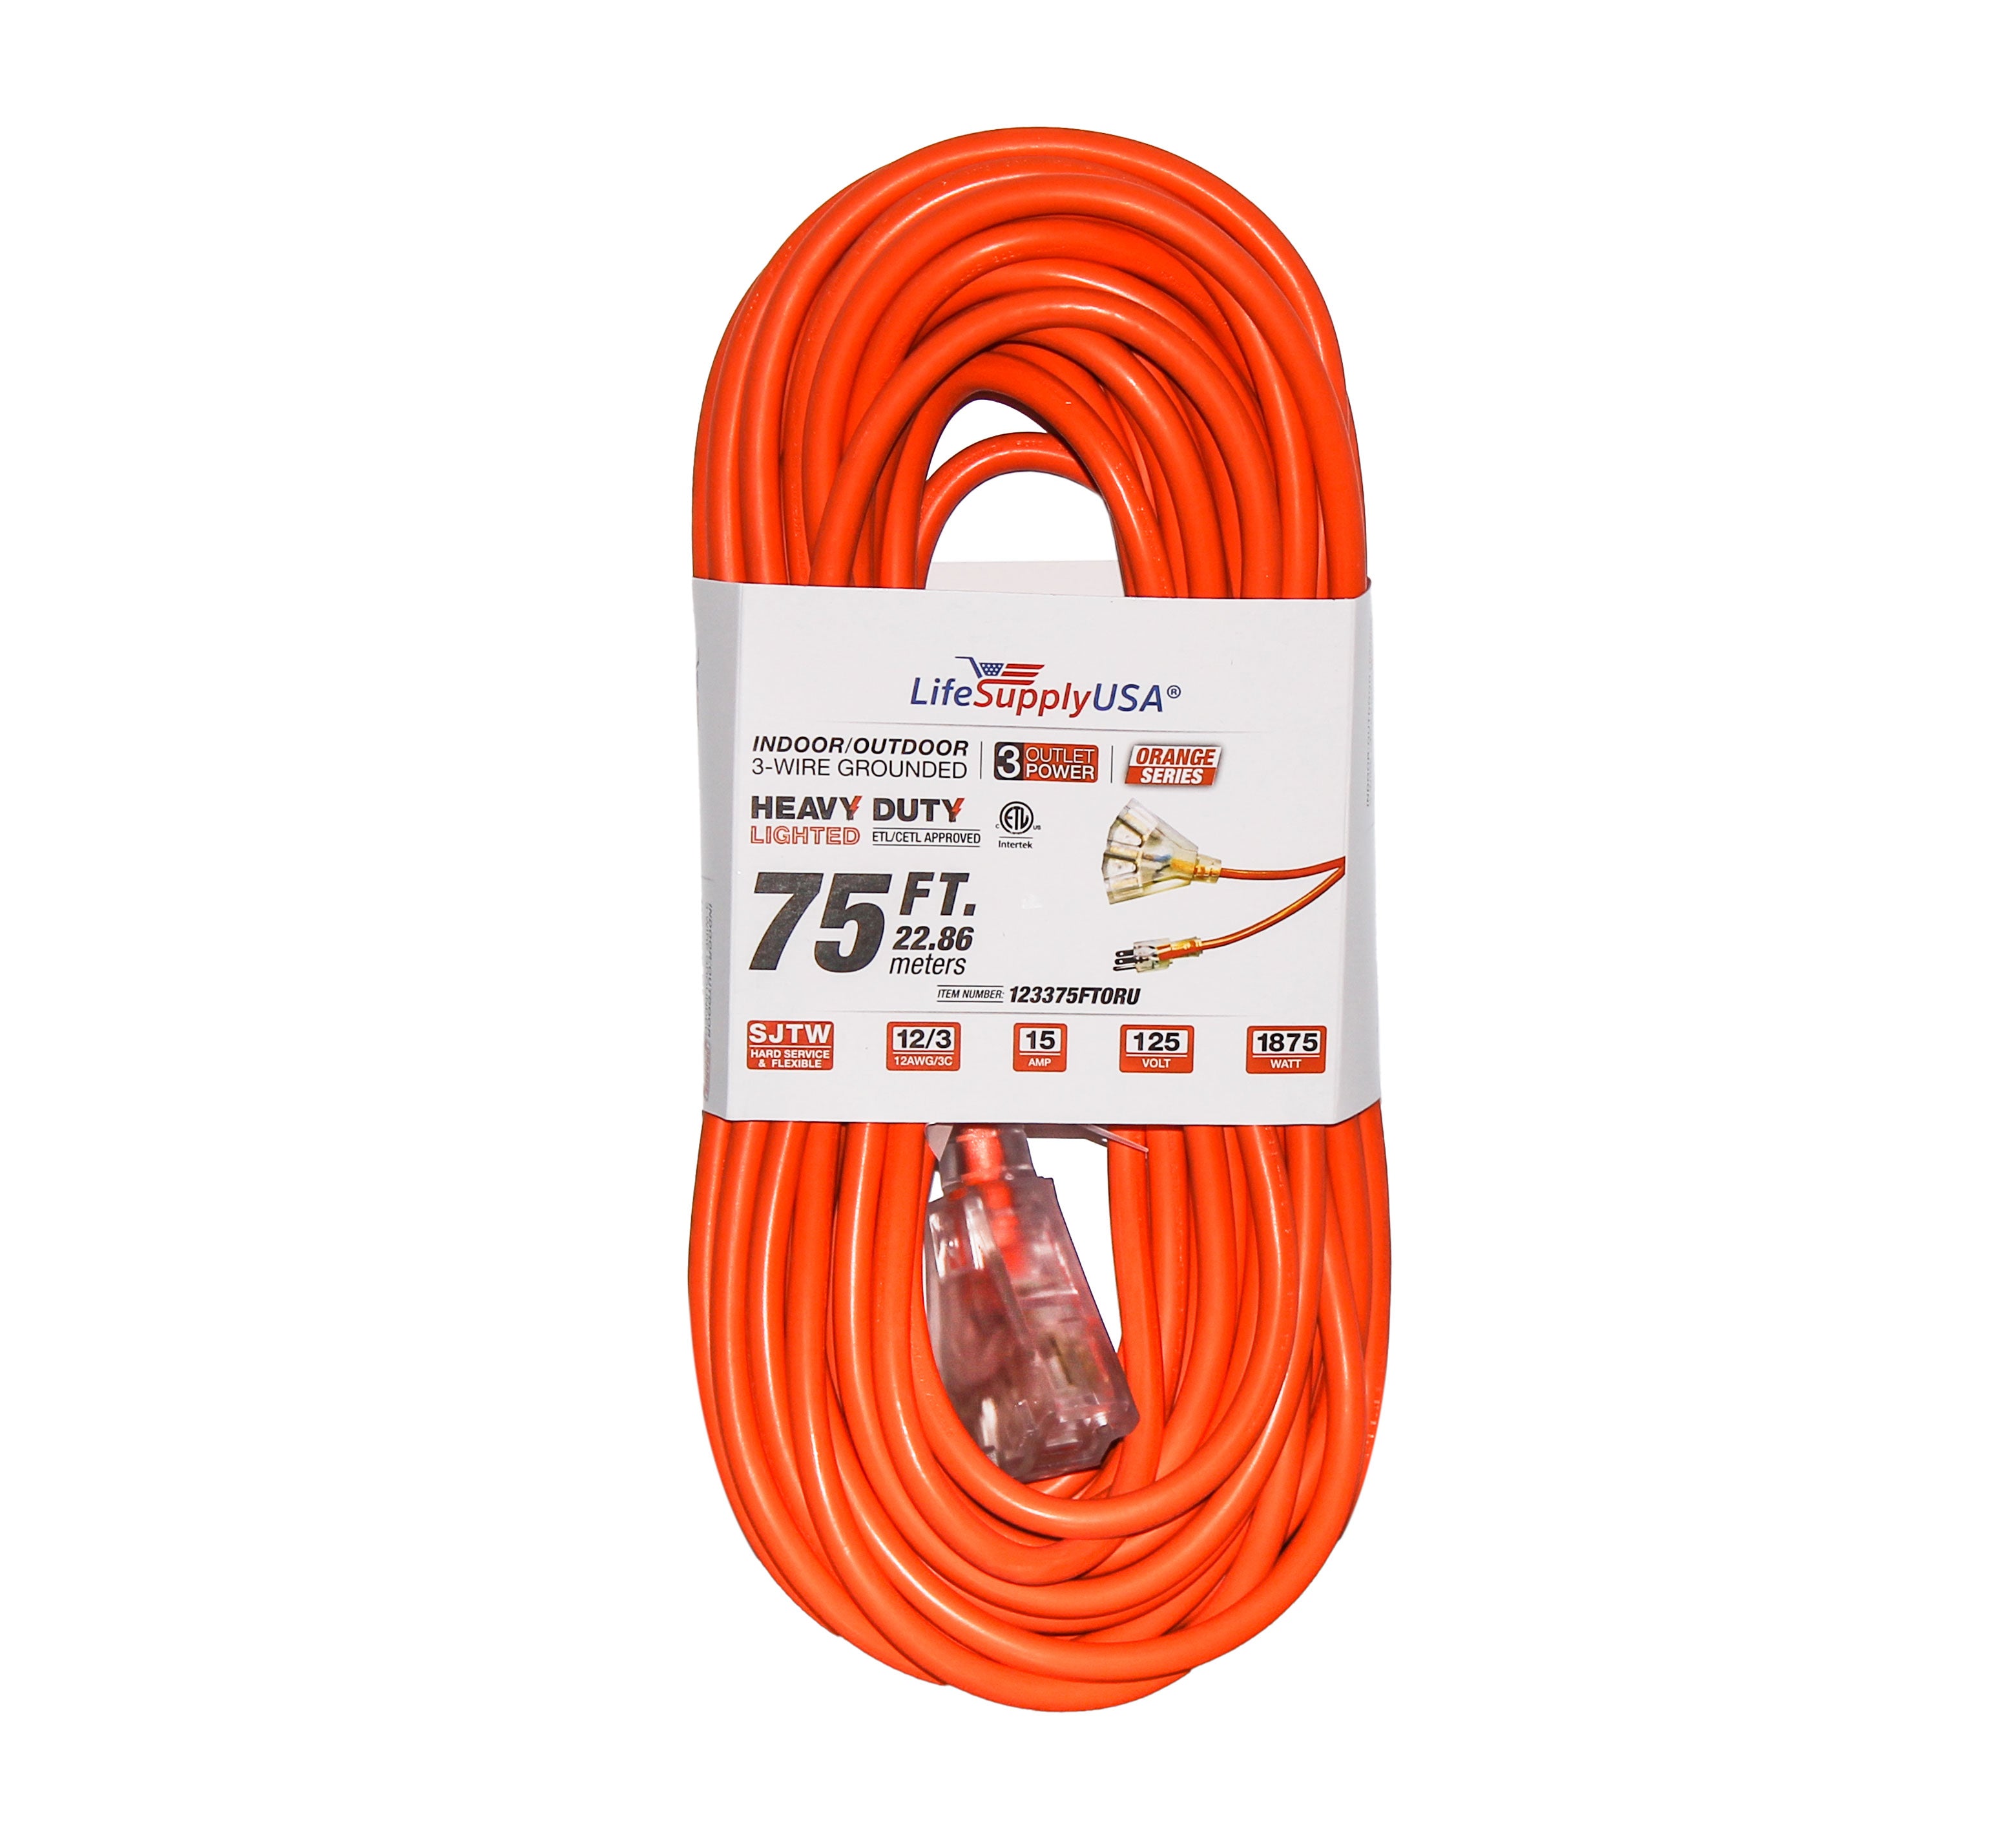 LifeSupplyUSA 75 ft Extension cord 12/3 3-Outlet SJTW with Lighted end  - Orange -  Indoor / Outdoor Heavy Duty Extra Durability 15AMP...